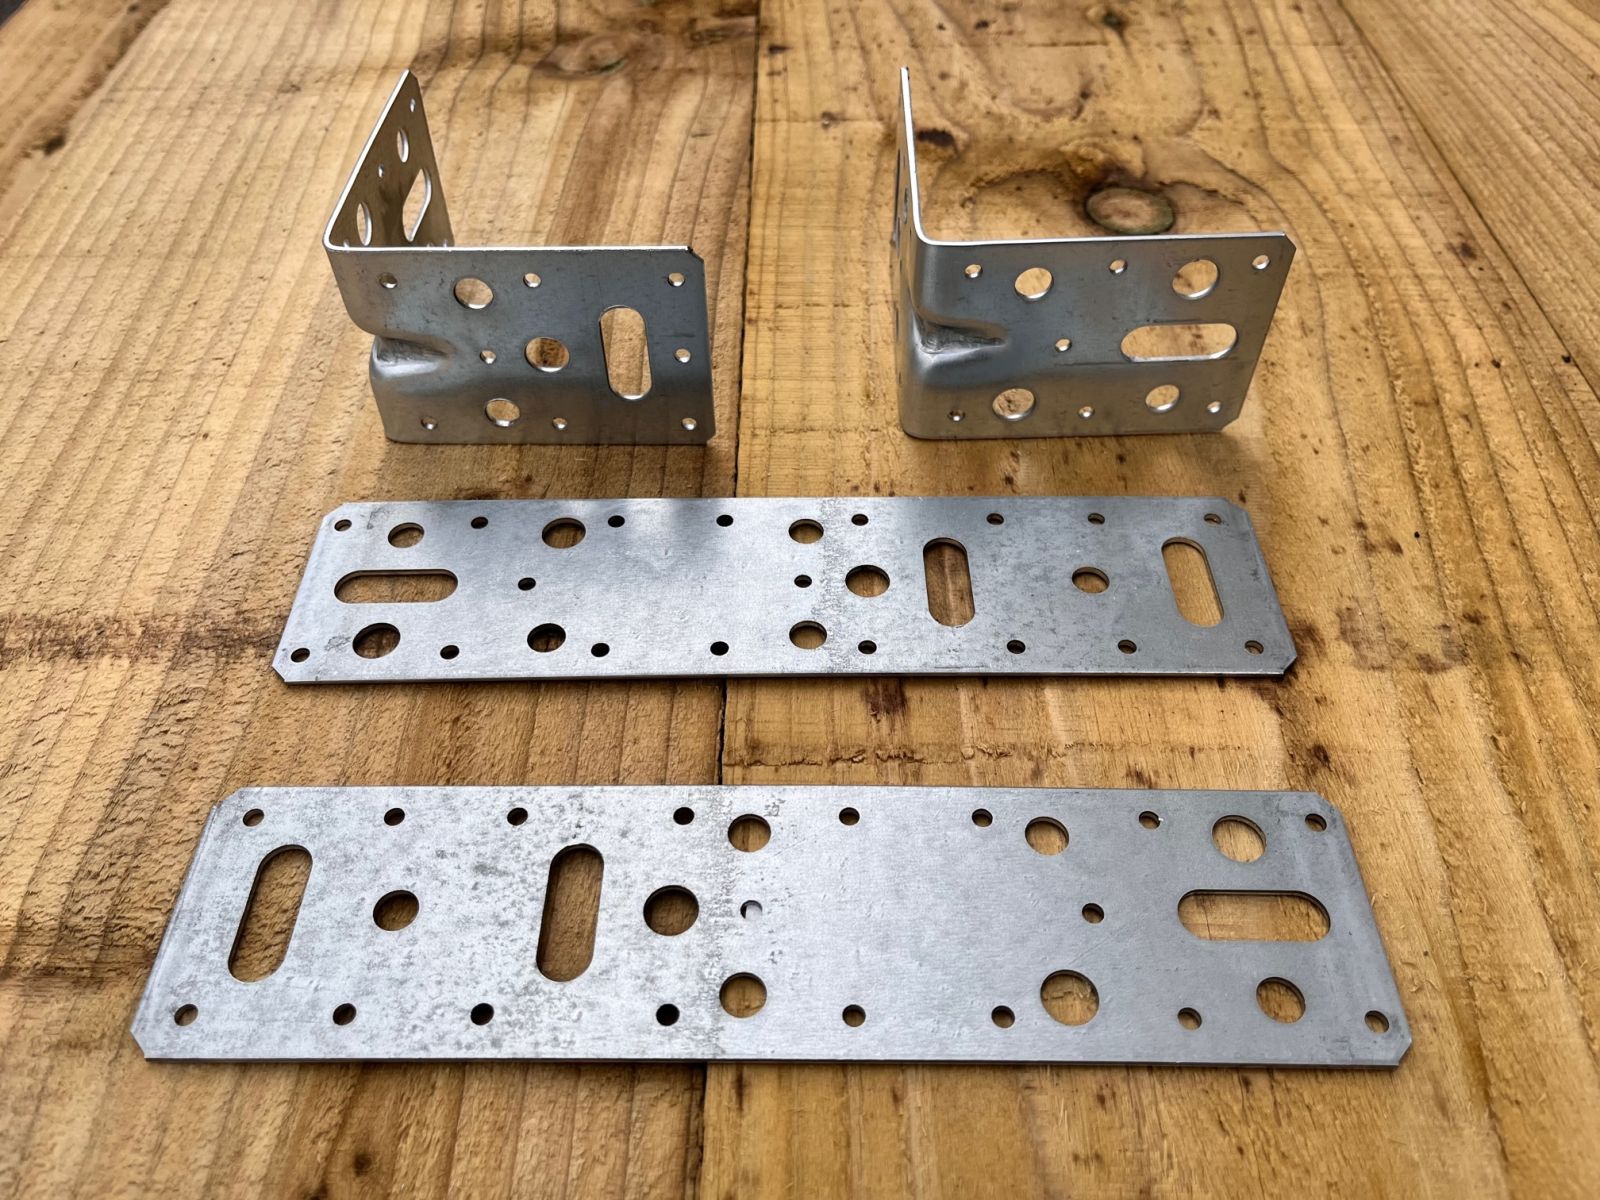 Steel angle brackets and flat connector plates for connecting railway sleepers together. Railwaysleepers.com